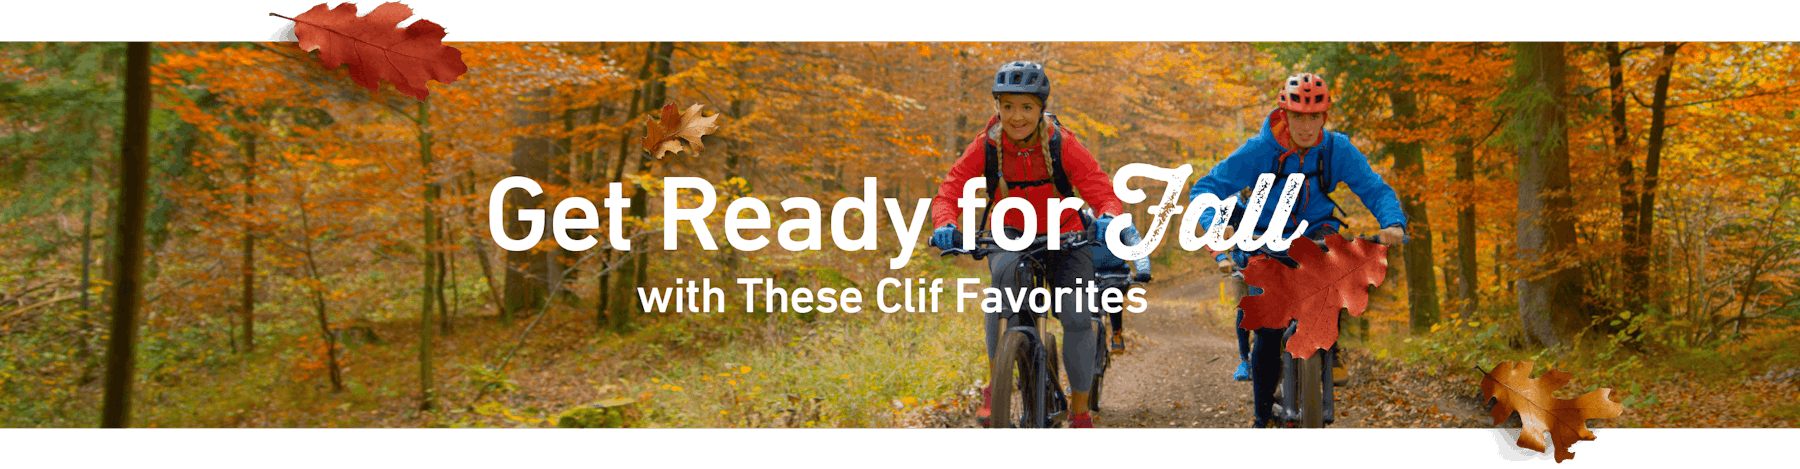 Get Ready For Fall With These Clif Favorites